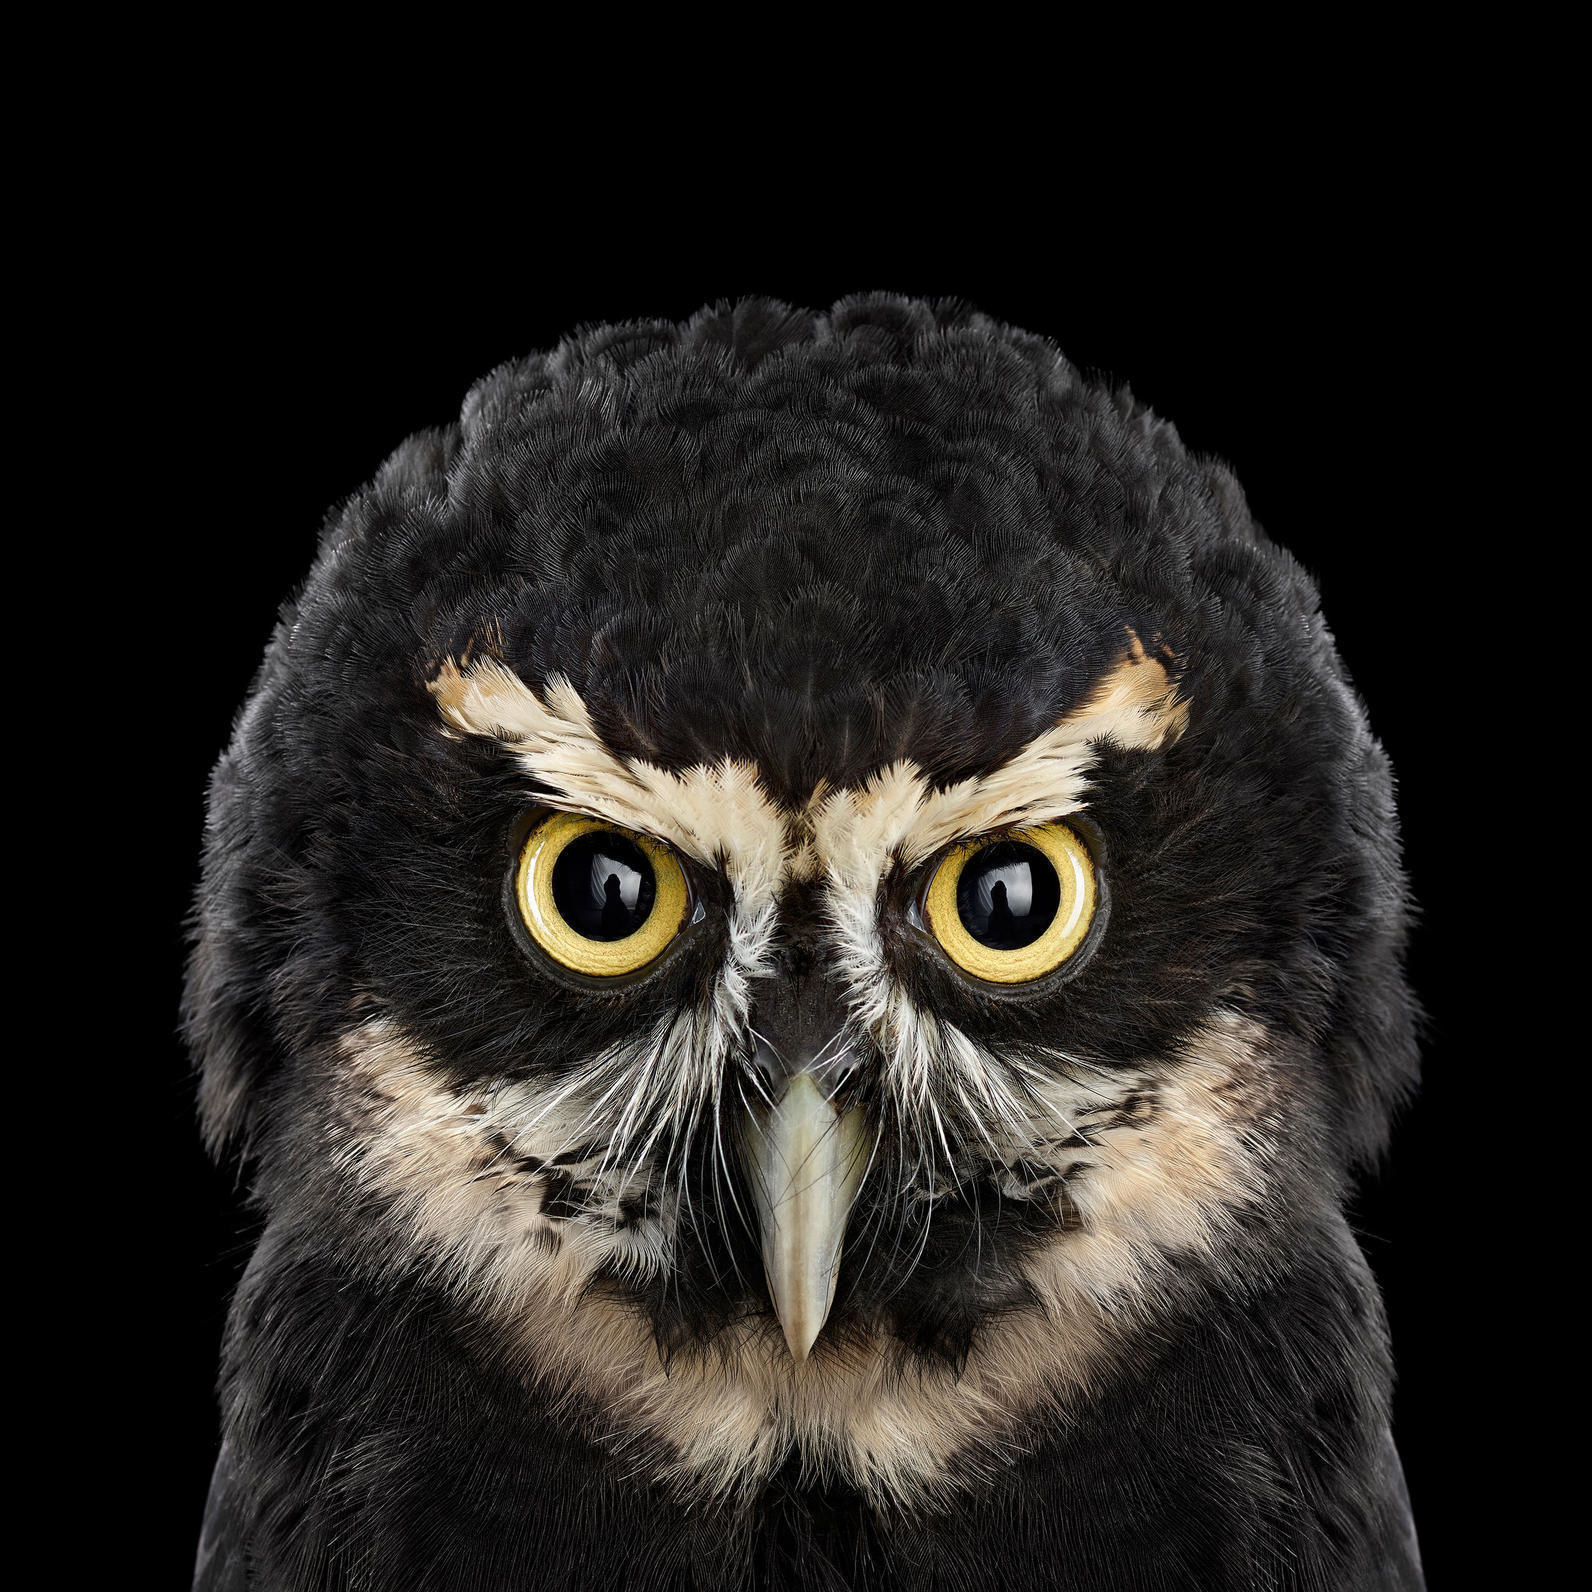 The Owls Are Challenging You To A Staring Contest… You Will Lose.